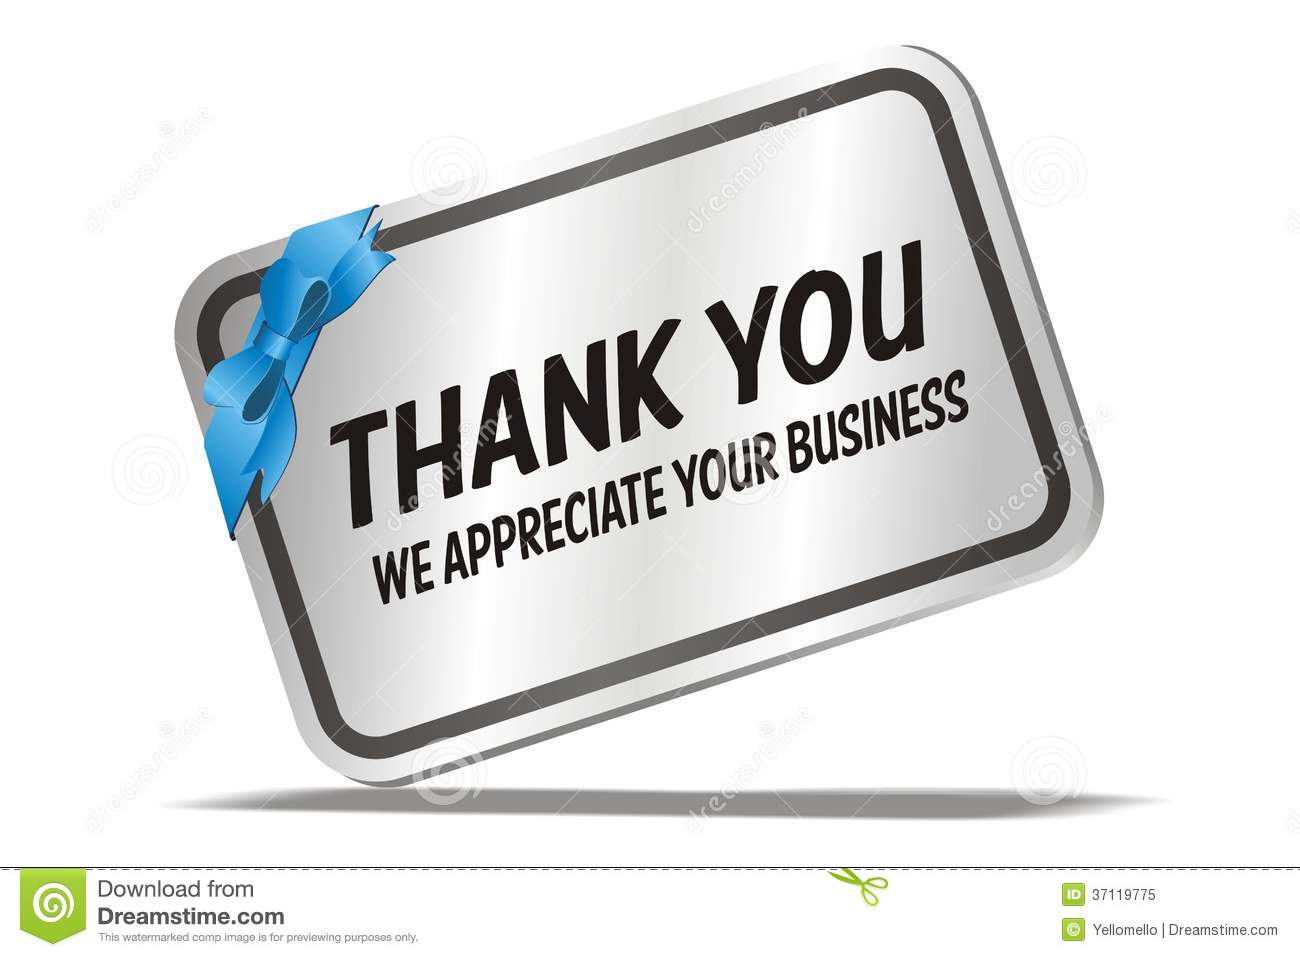 Free Stock Photo  Thank You We Appreciate Your Business   Silver Card